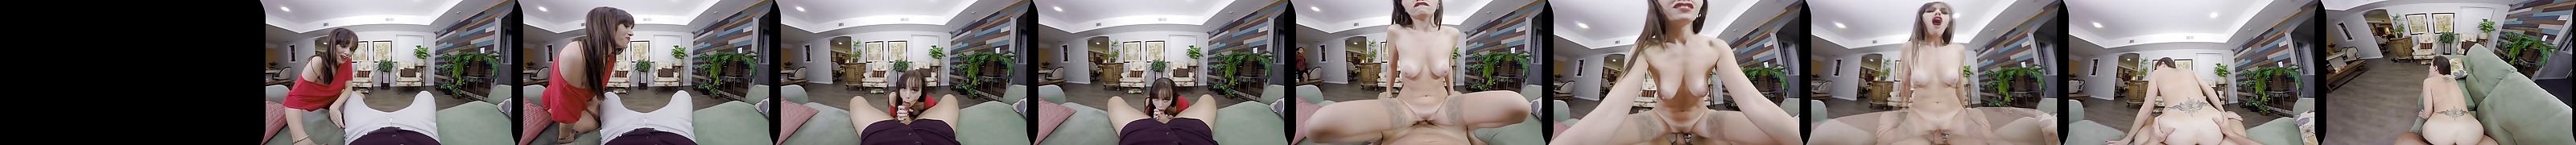 Newest Vr Porn Videos And Free Sex Movies 118 Xhamster